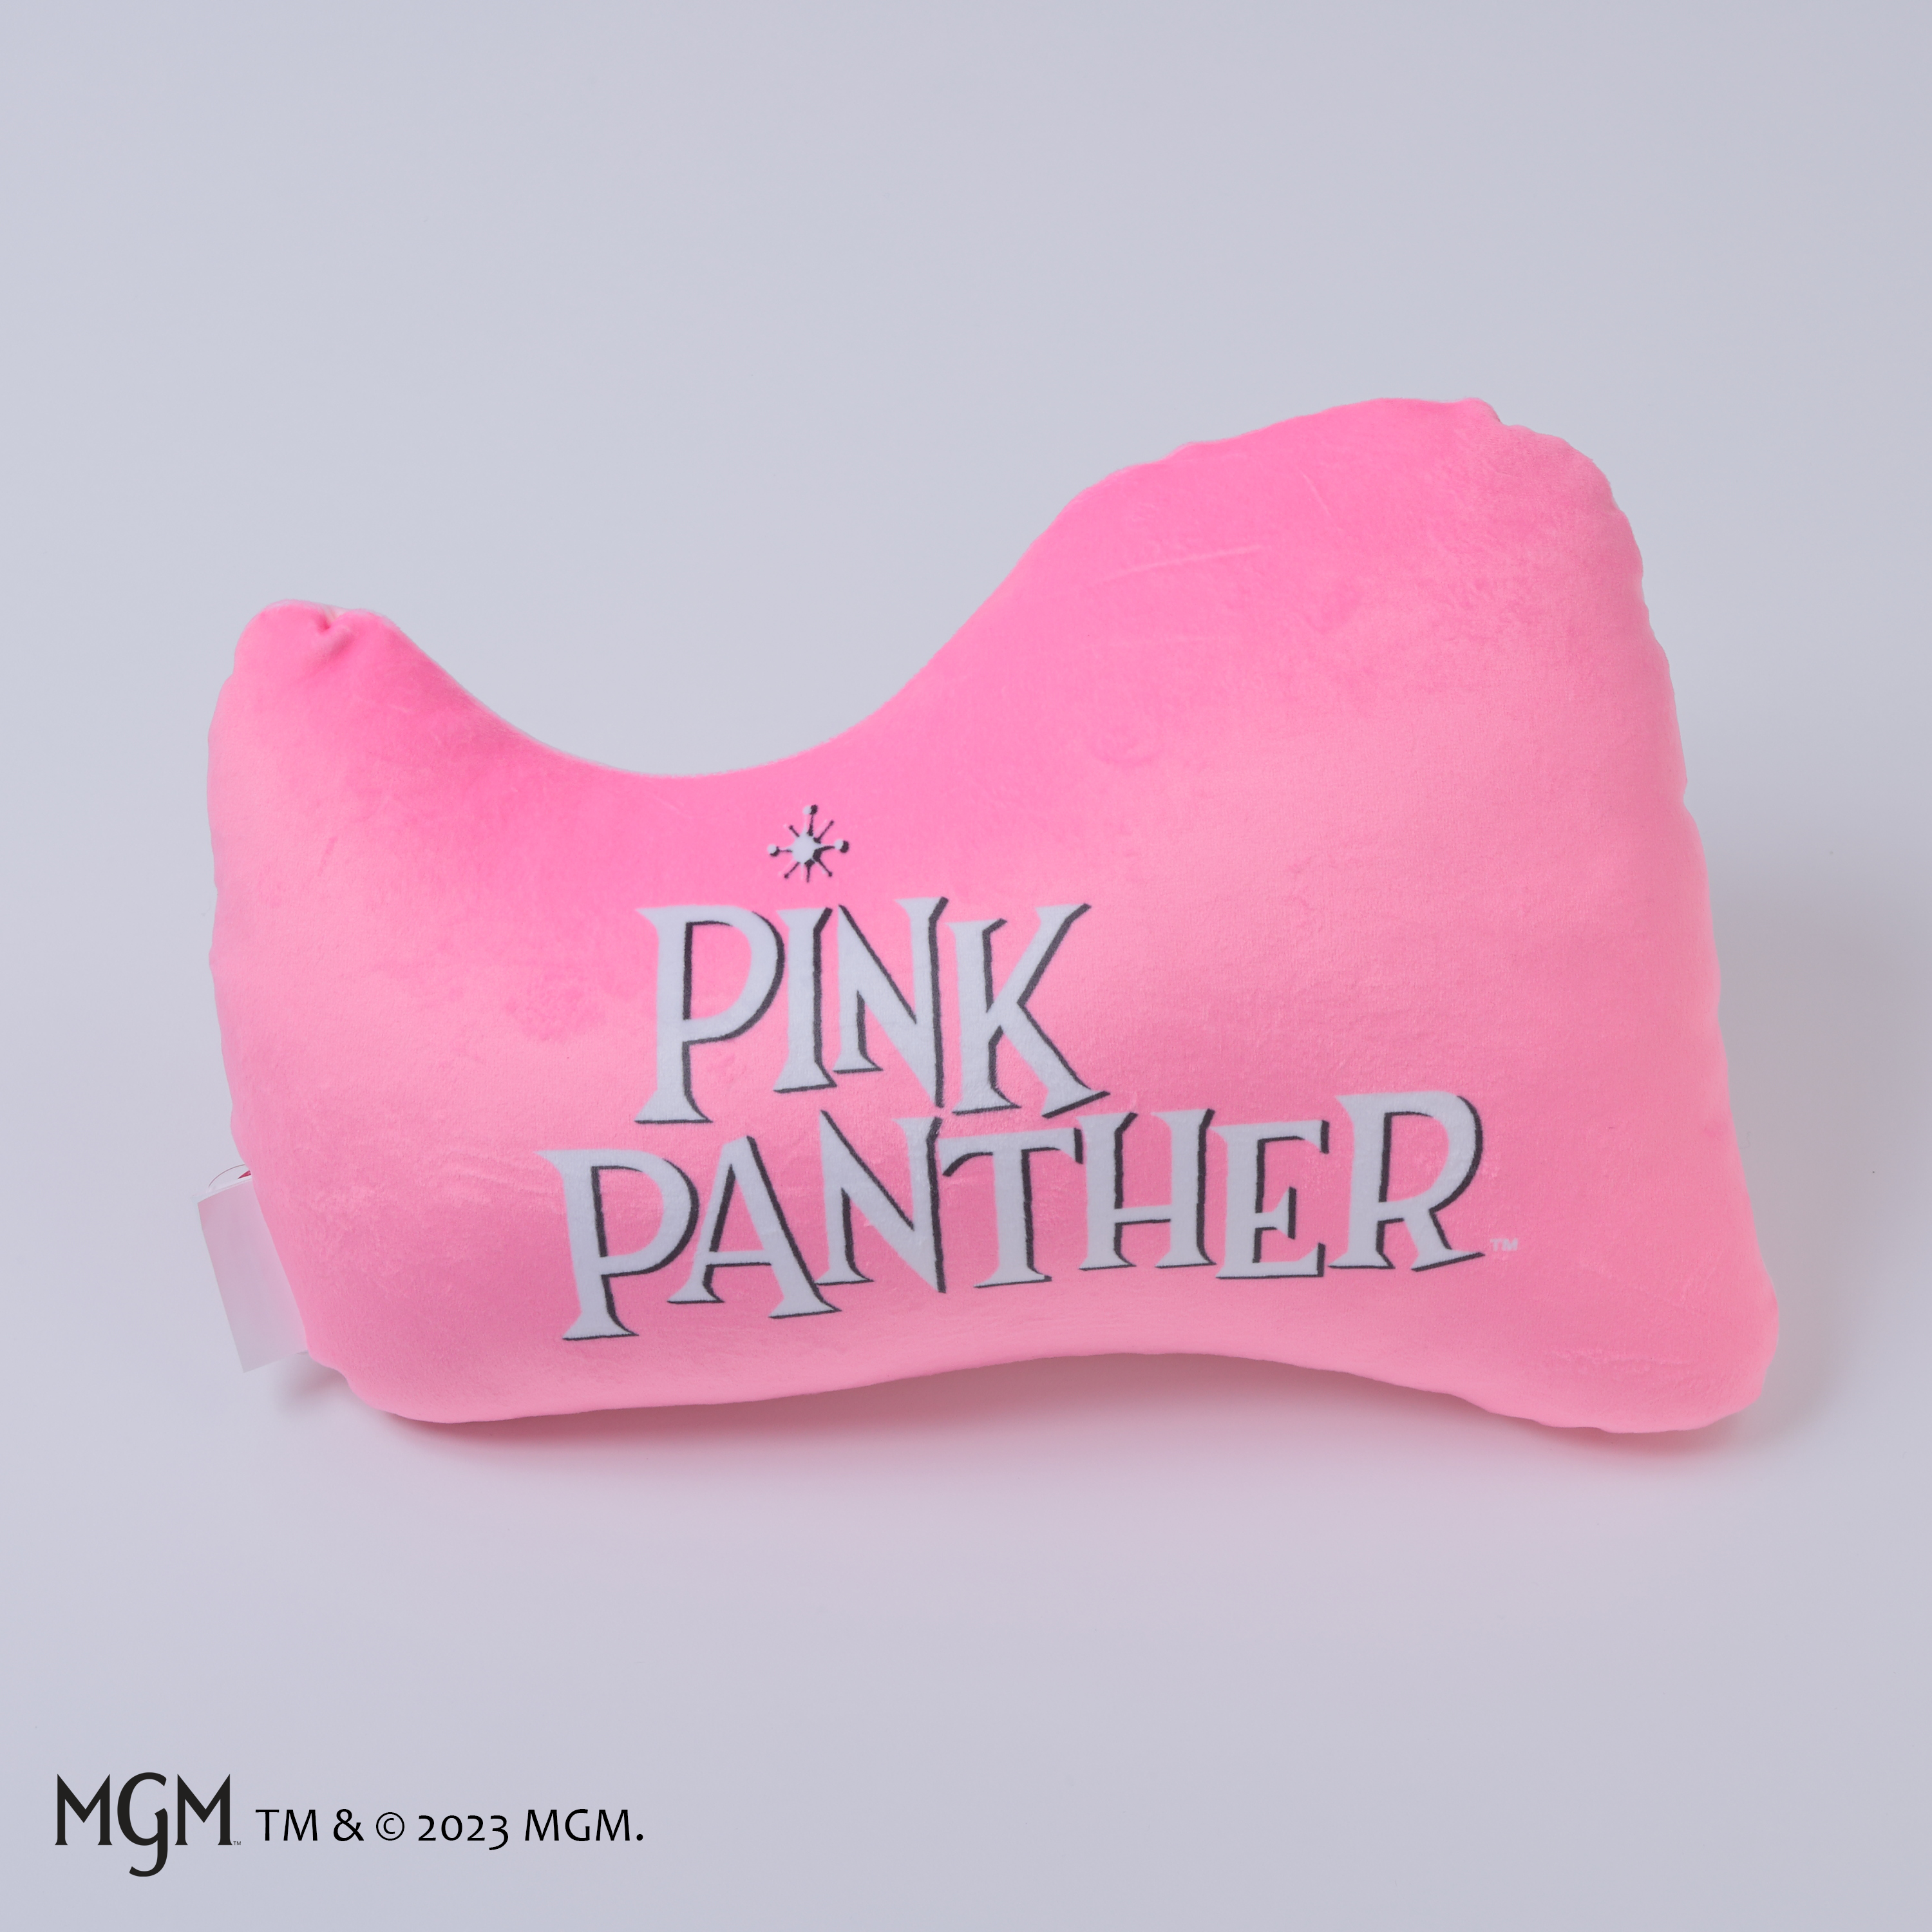 [Pink Panther] 2 types of cushions